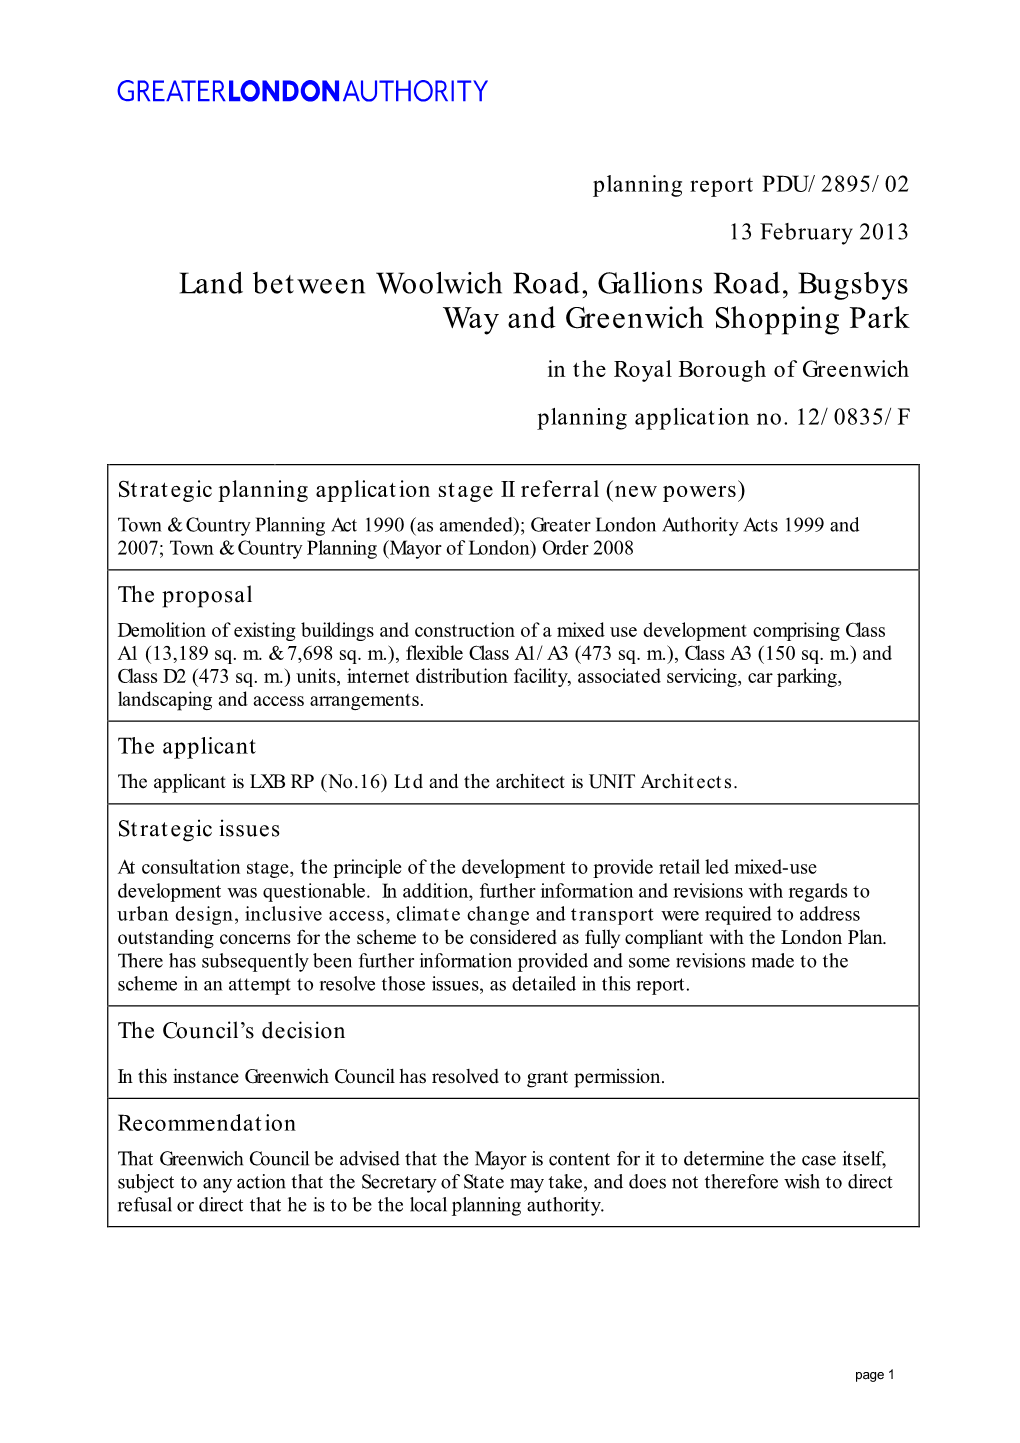 Land Between Woolwich Road, Gallions Road, Bugsbys Way and Greenwich Shopping Park in the Royal Borough of Greenwich Planning Application No